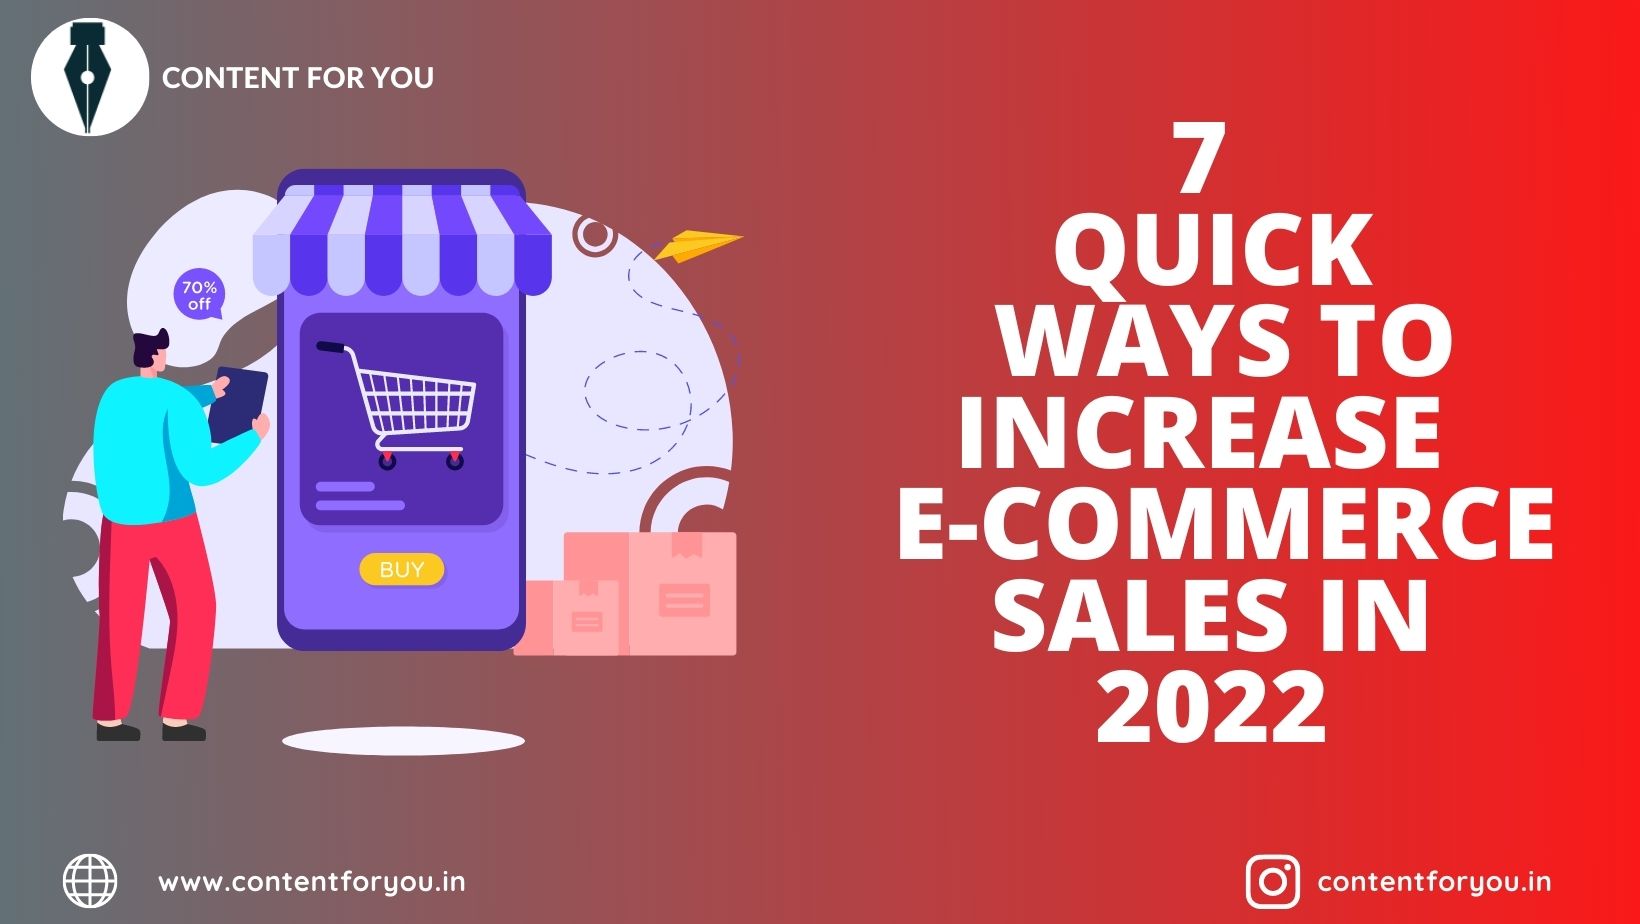 7 quick ways to increase e-commerce sales in 2022